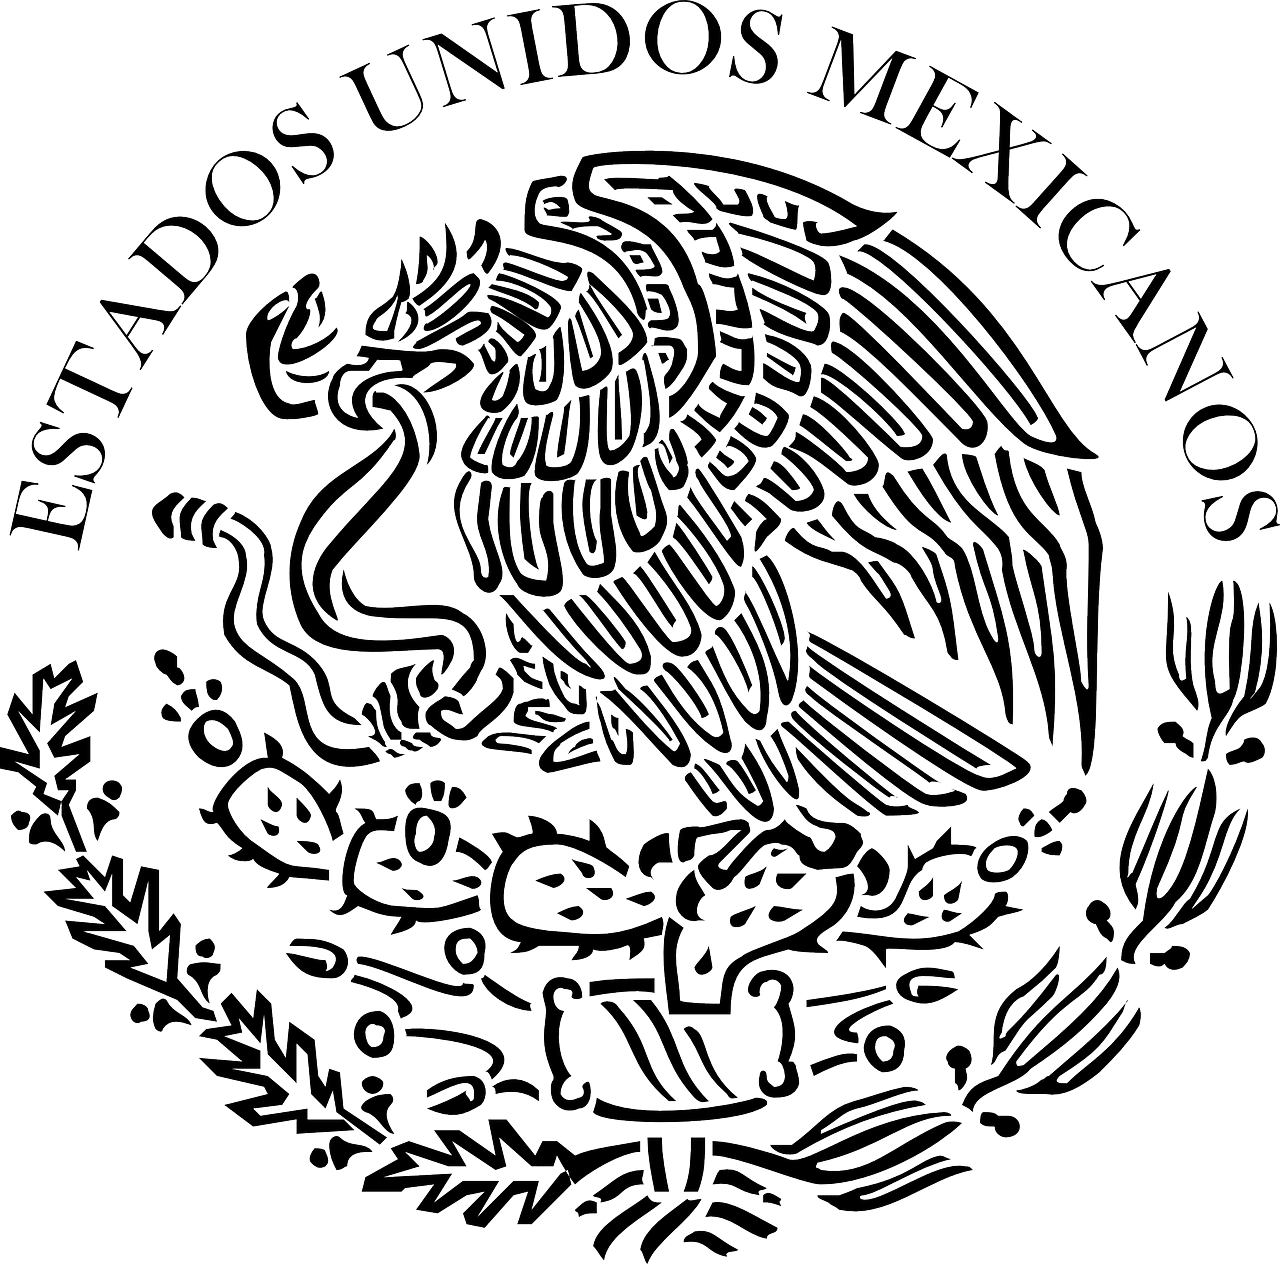 traveling to mexico, mexico travel warning, mexico travel, travel advisory mexico, mexico travel warning 2017, state department travel warnings mexico, mexico travel ban, cancun travel advistory, is mexico safe, is mexico safe to travel, is it safe to travel to mexico, lonely planet mexico,